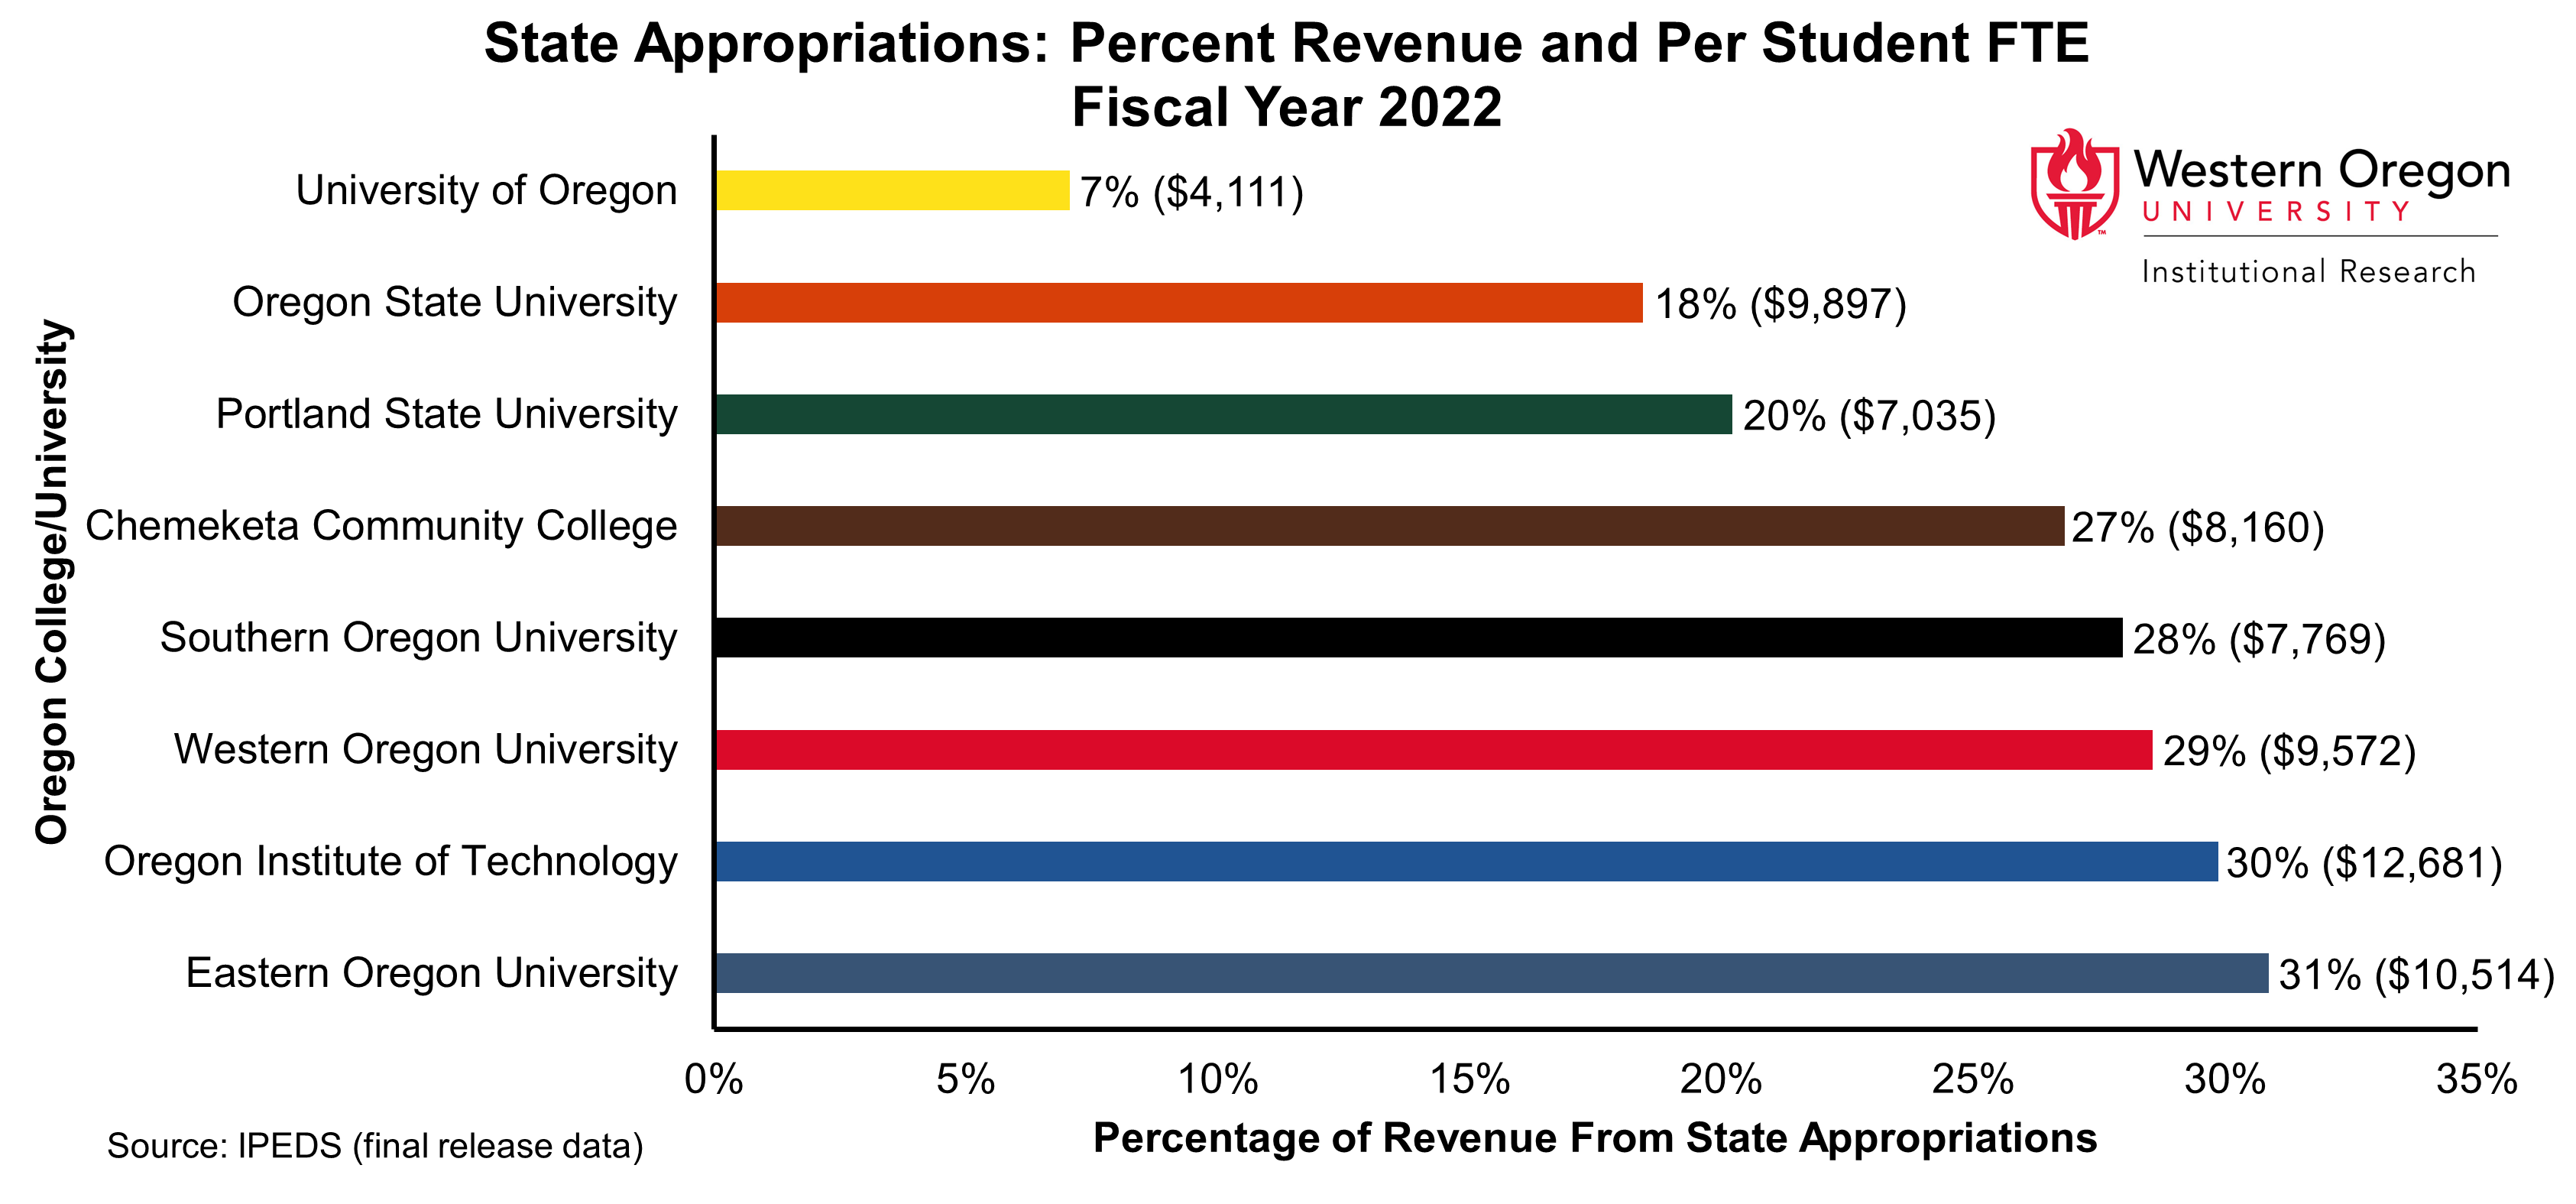 Bar graph of the percentage of revenue from state appropriations for WOU and other Oregon Public Universities in fiscal year 2022, showing percentages that range from 7% to 31% with WOU at 29%.